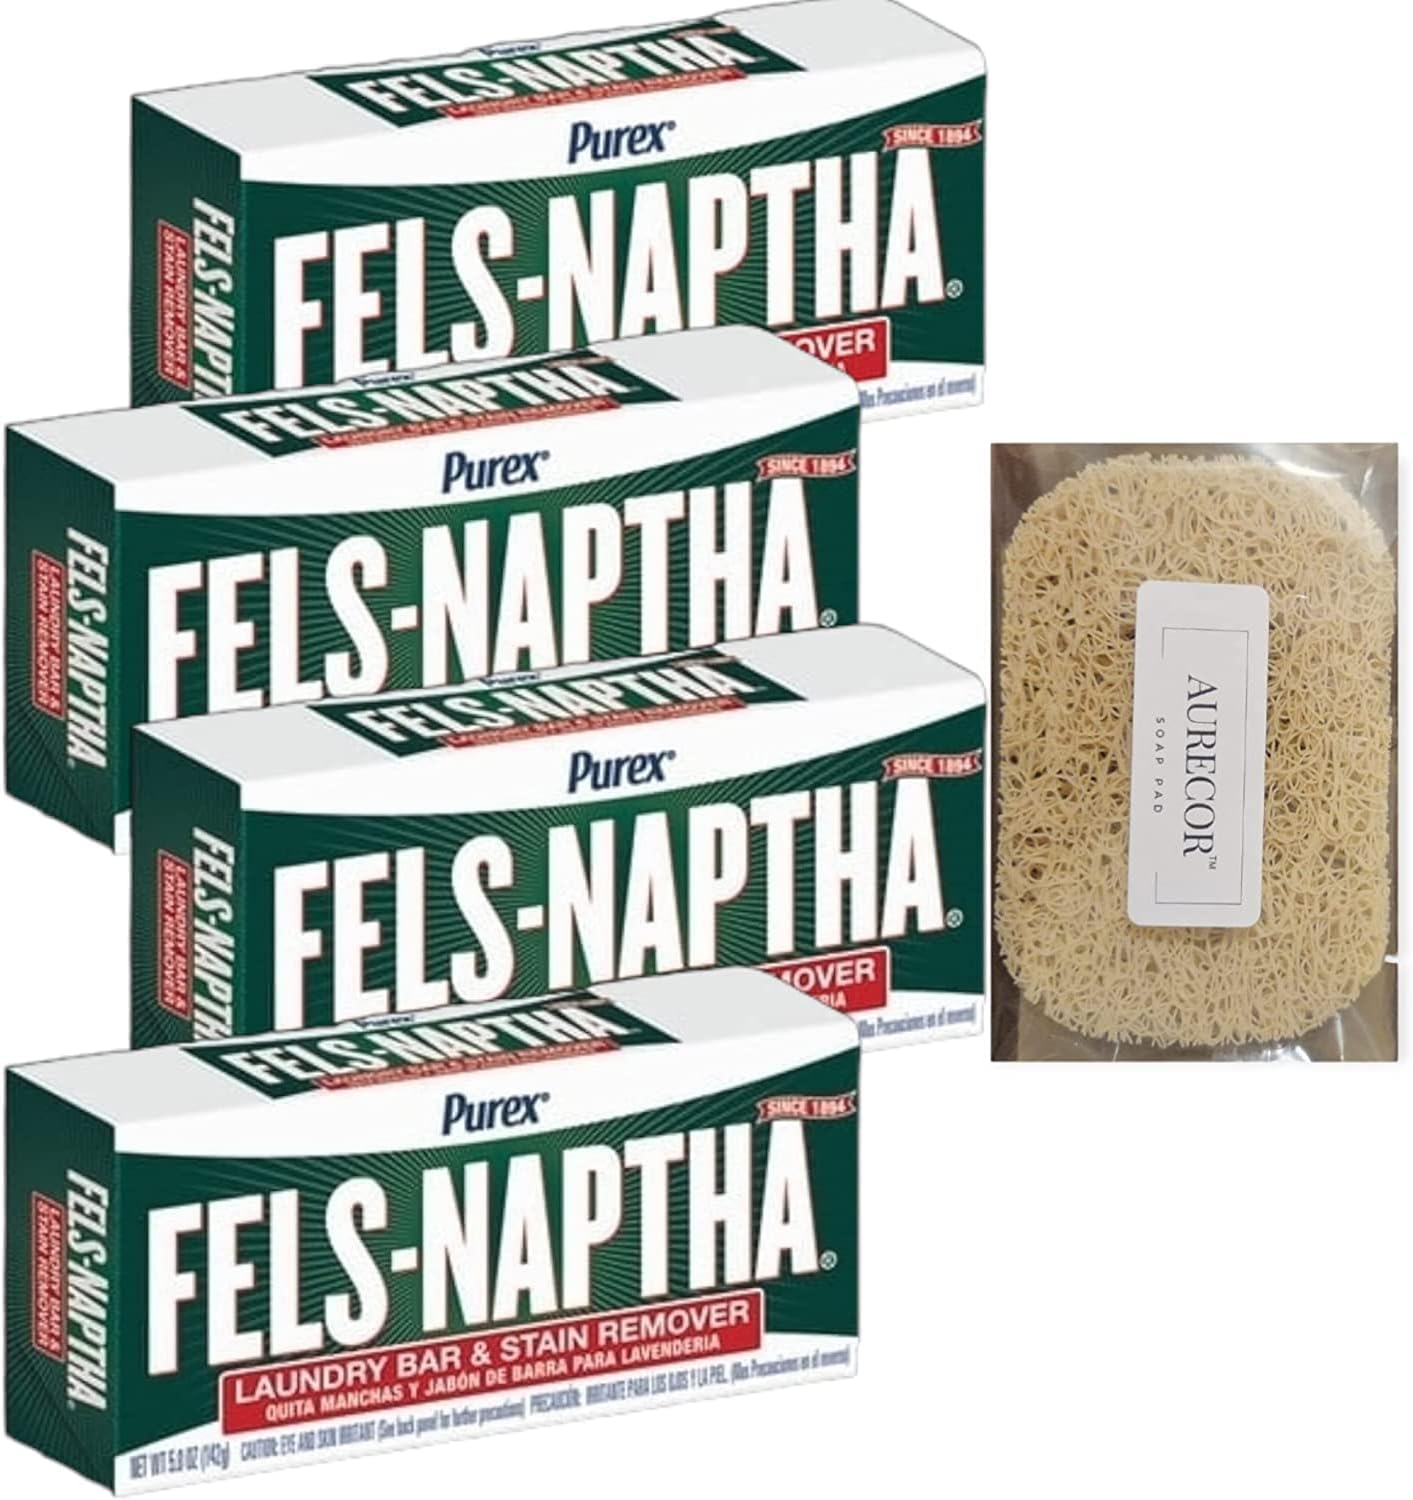 Fels Naptha Laundry Bar and Stain Remover, 5.0 Ounce (Pack of 4) with Aurecor Soap Pad